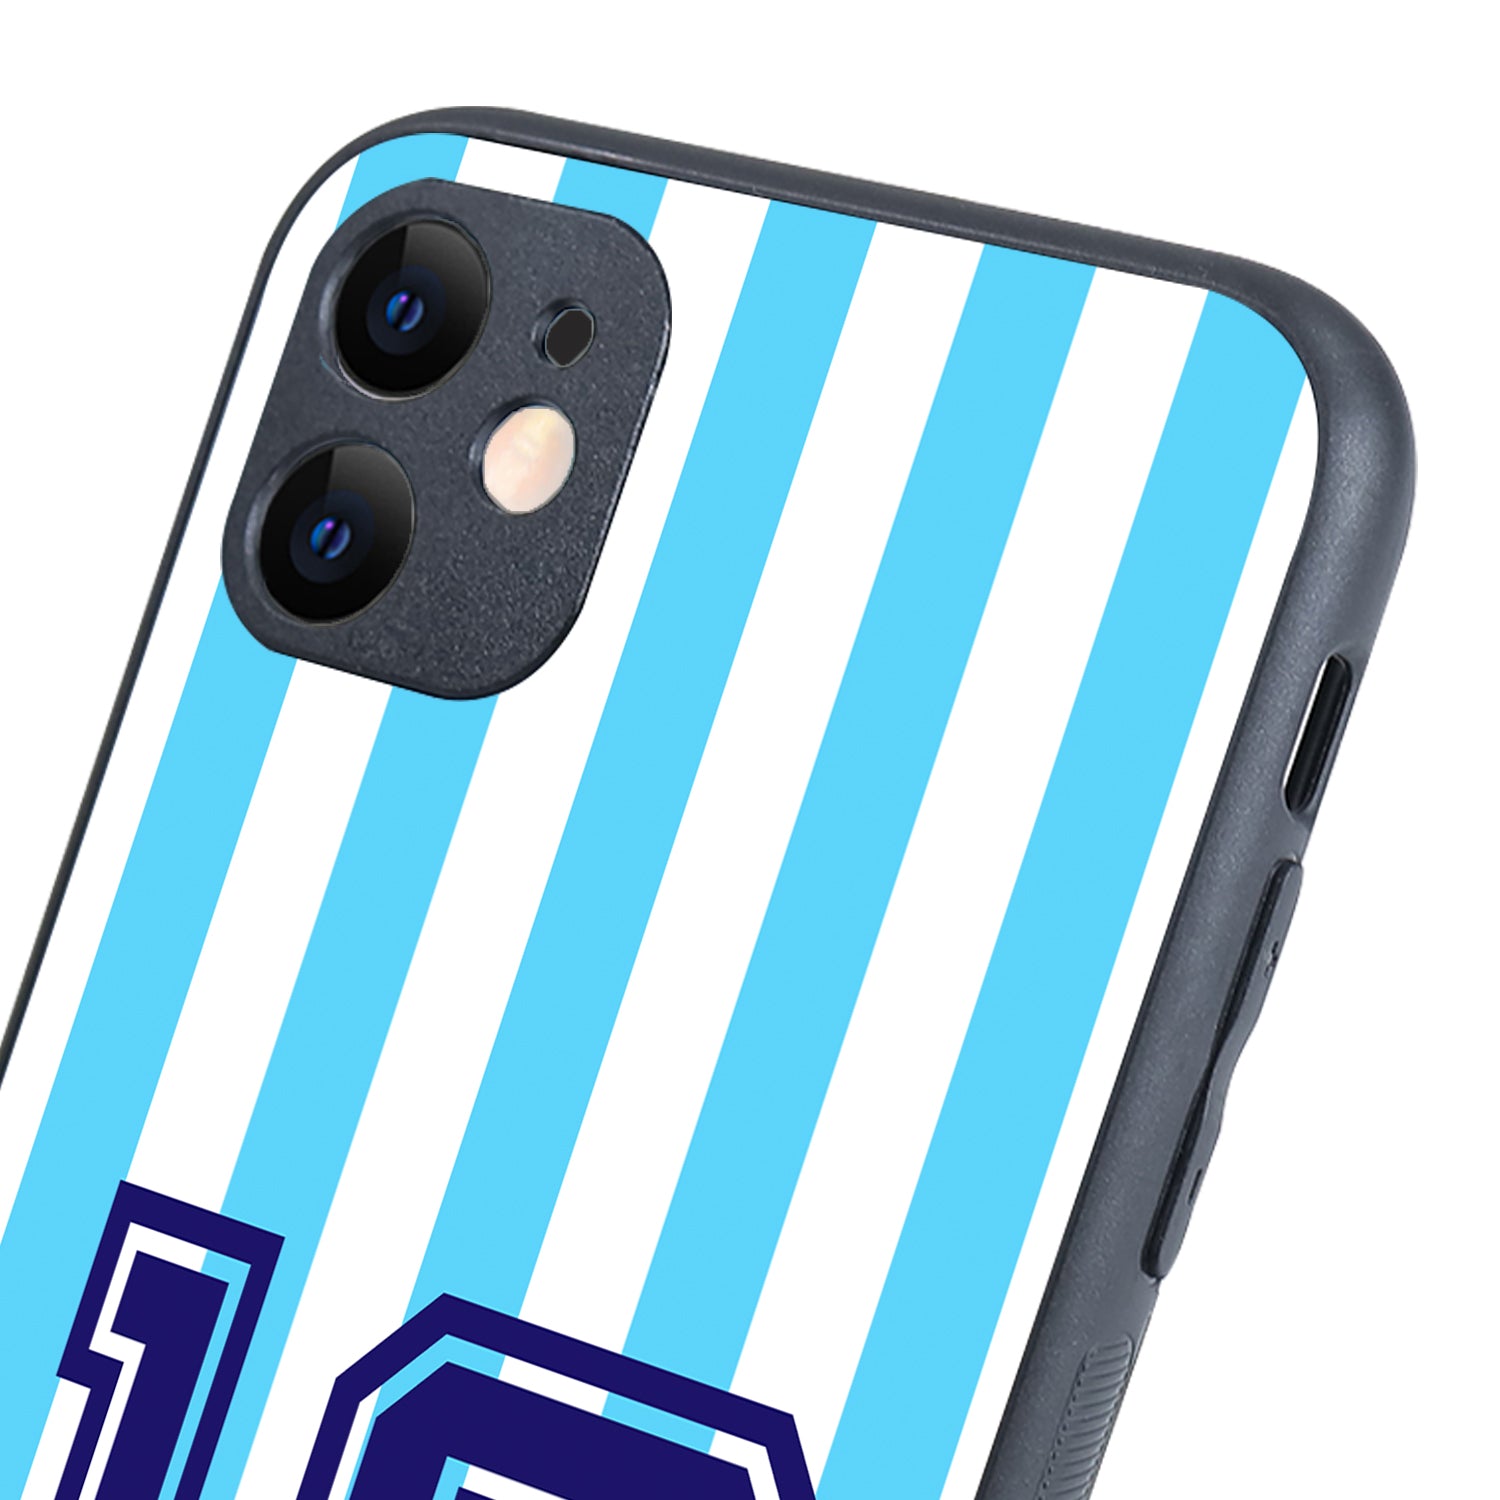 Jersey 10 Sports iPhone 11 Case